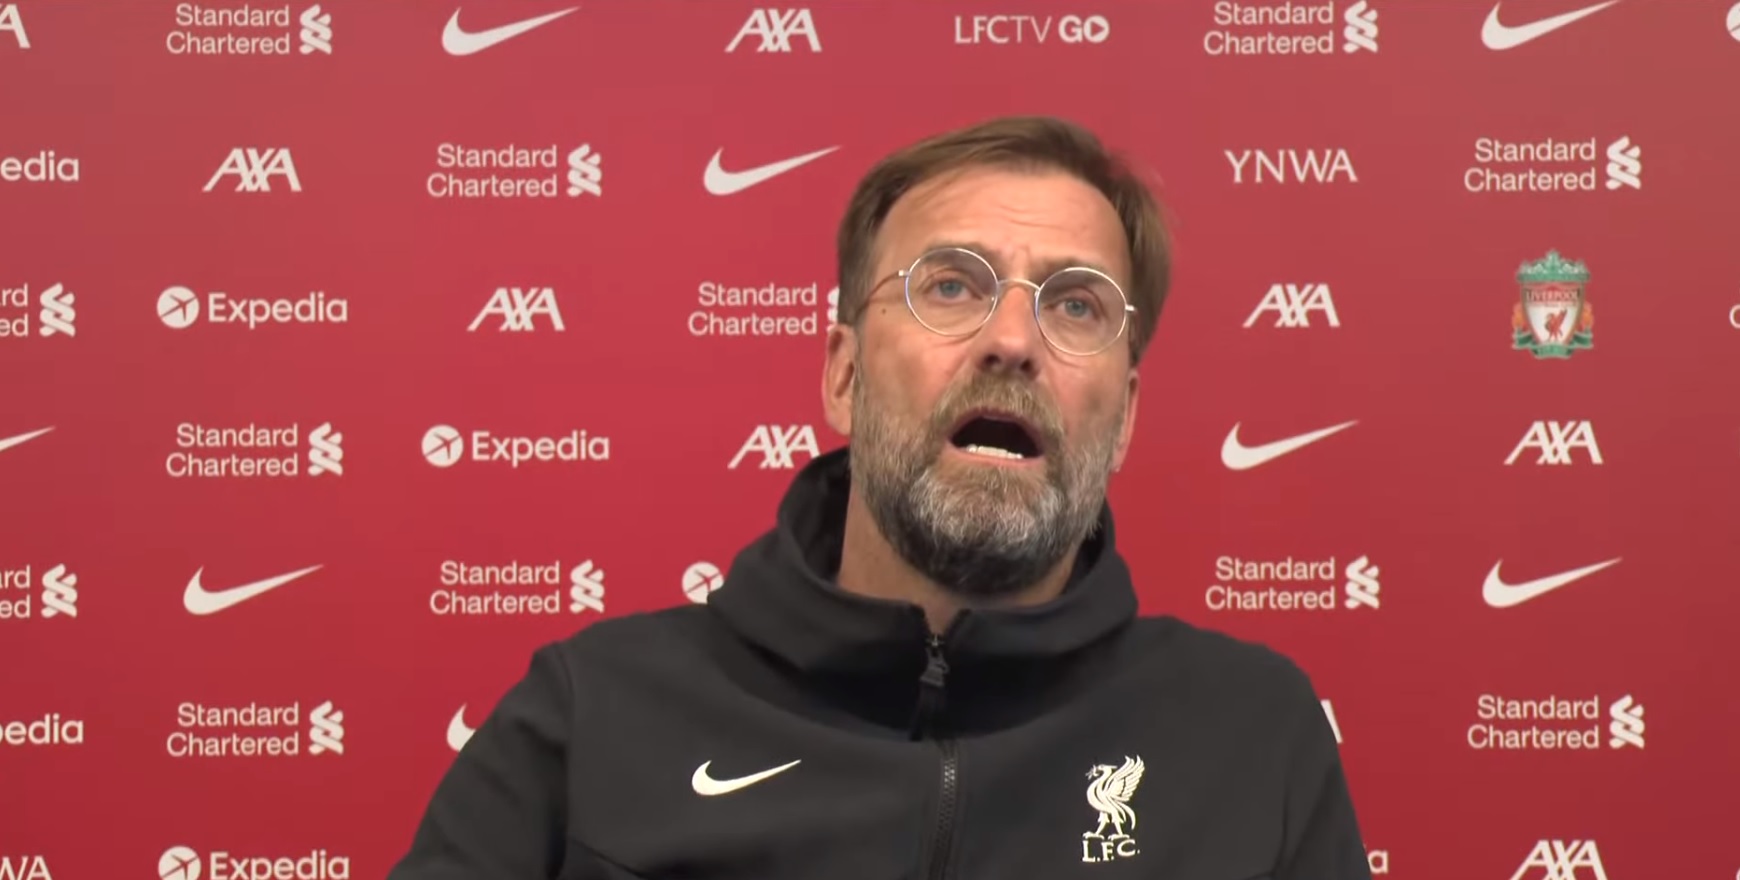 ‘What’s the reason for that? Money’ – Klopp blasts new ‘joke’ Champions League format